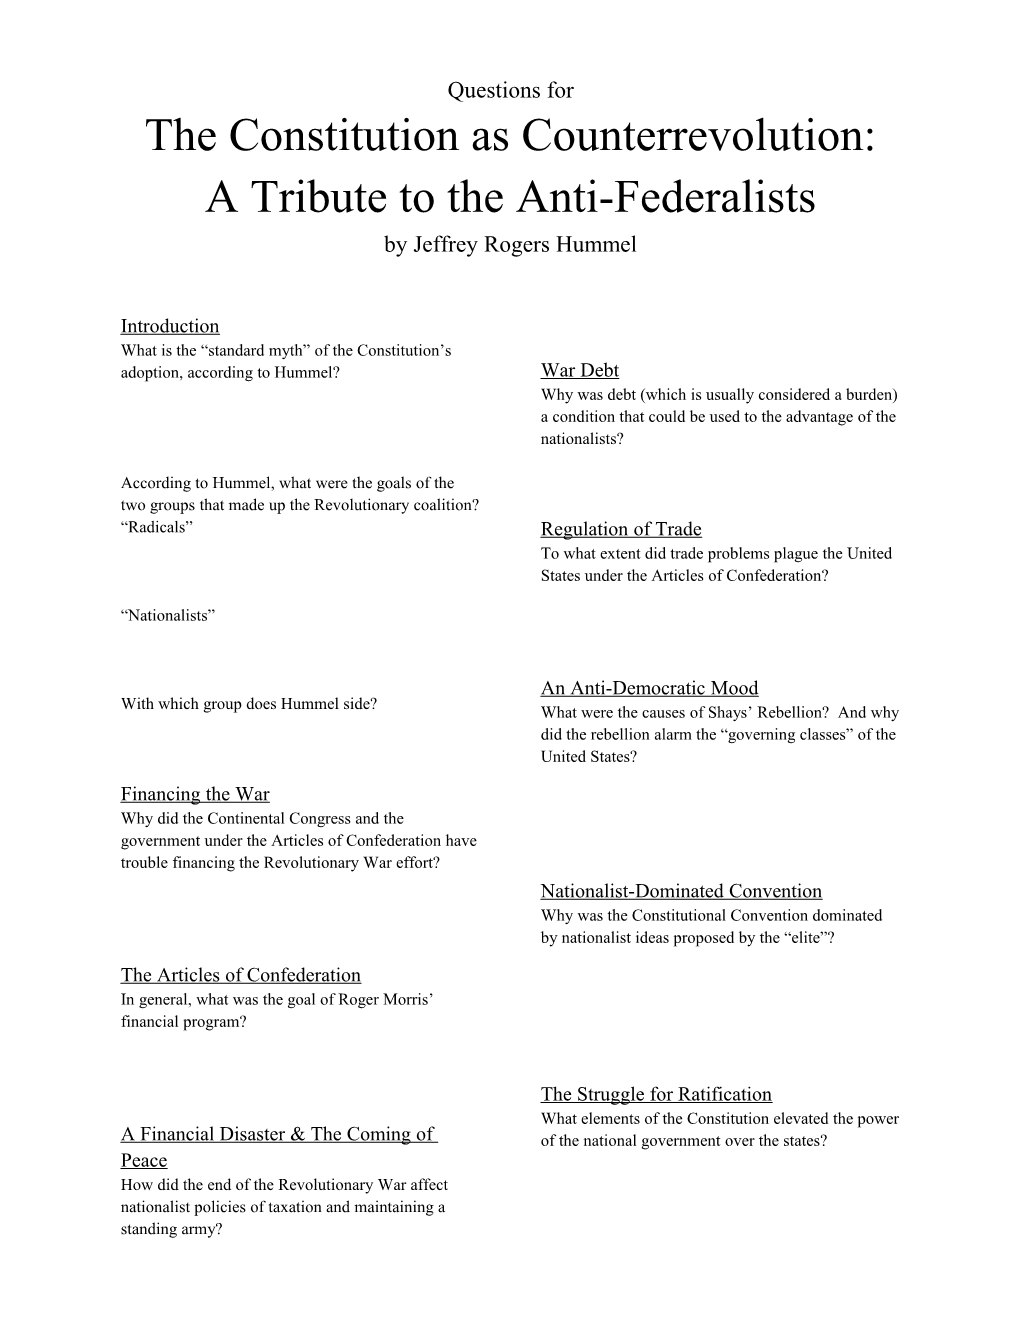 A Tribute to the Anti-Federalists